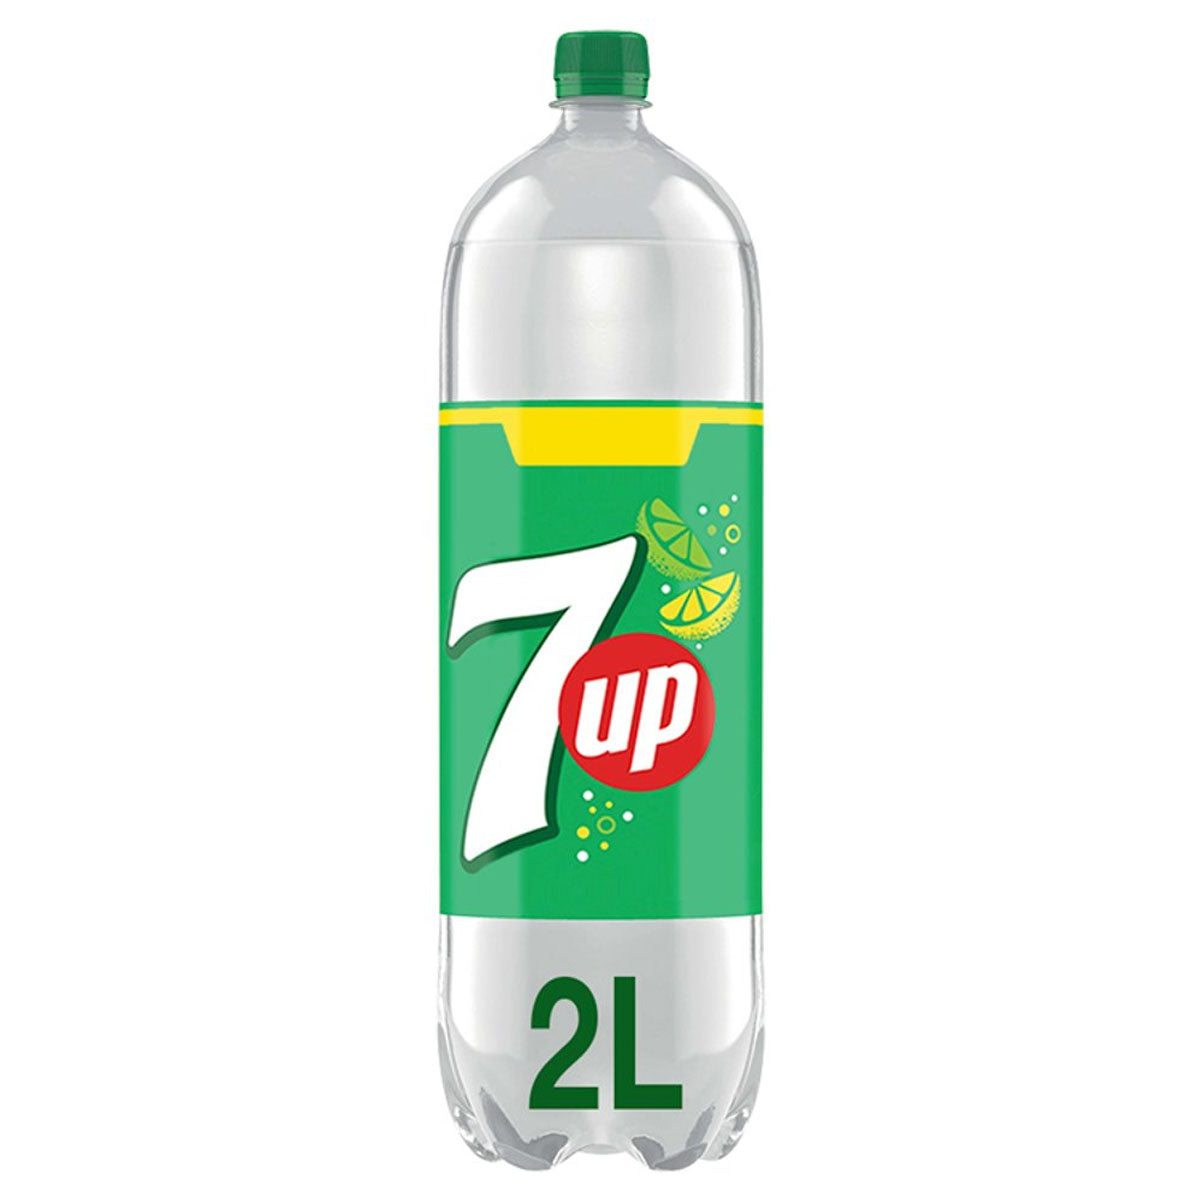 7up - Bottle - 2L - Continental Food Store